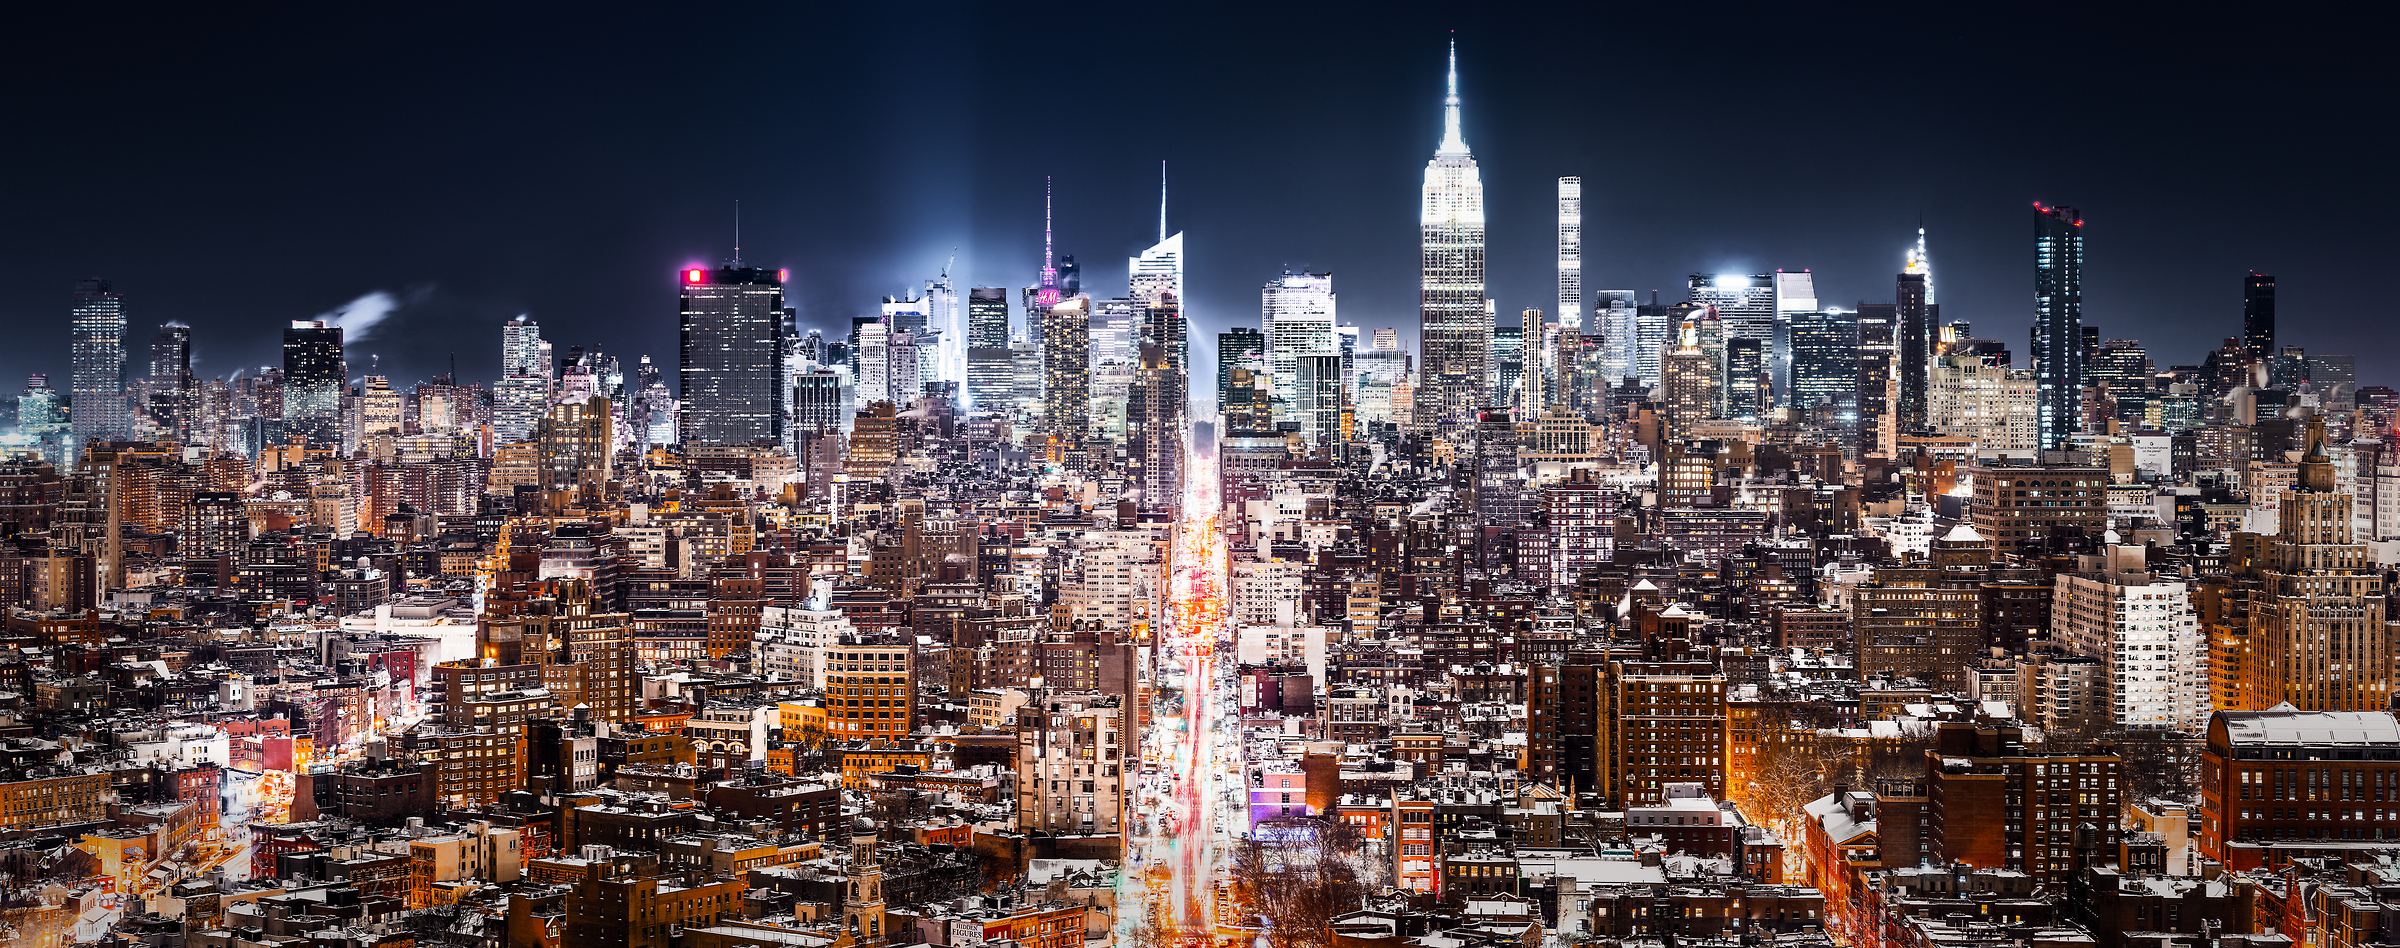 2,002 megapixels! A very high resolution, large-format VAST photo print of New York City at night; cityscape fine art photo created by Dan Piech in Midtown Manhattan, New York City